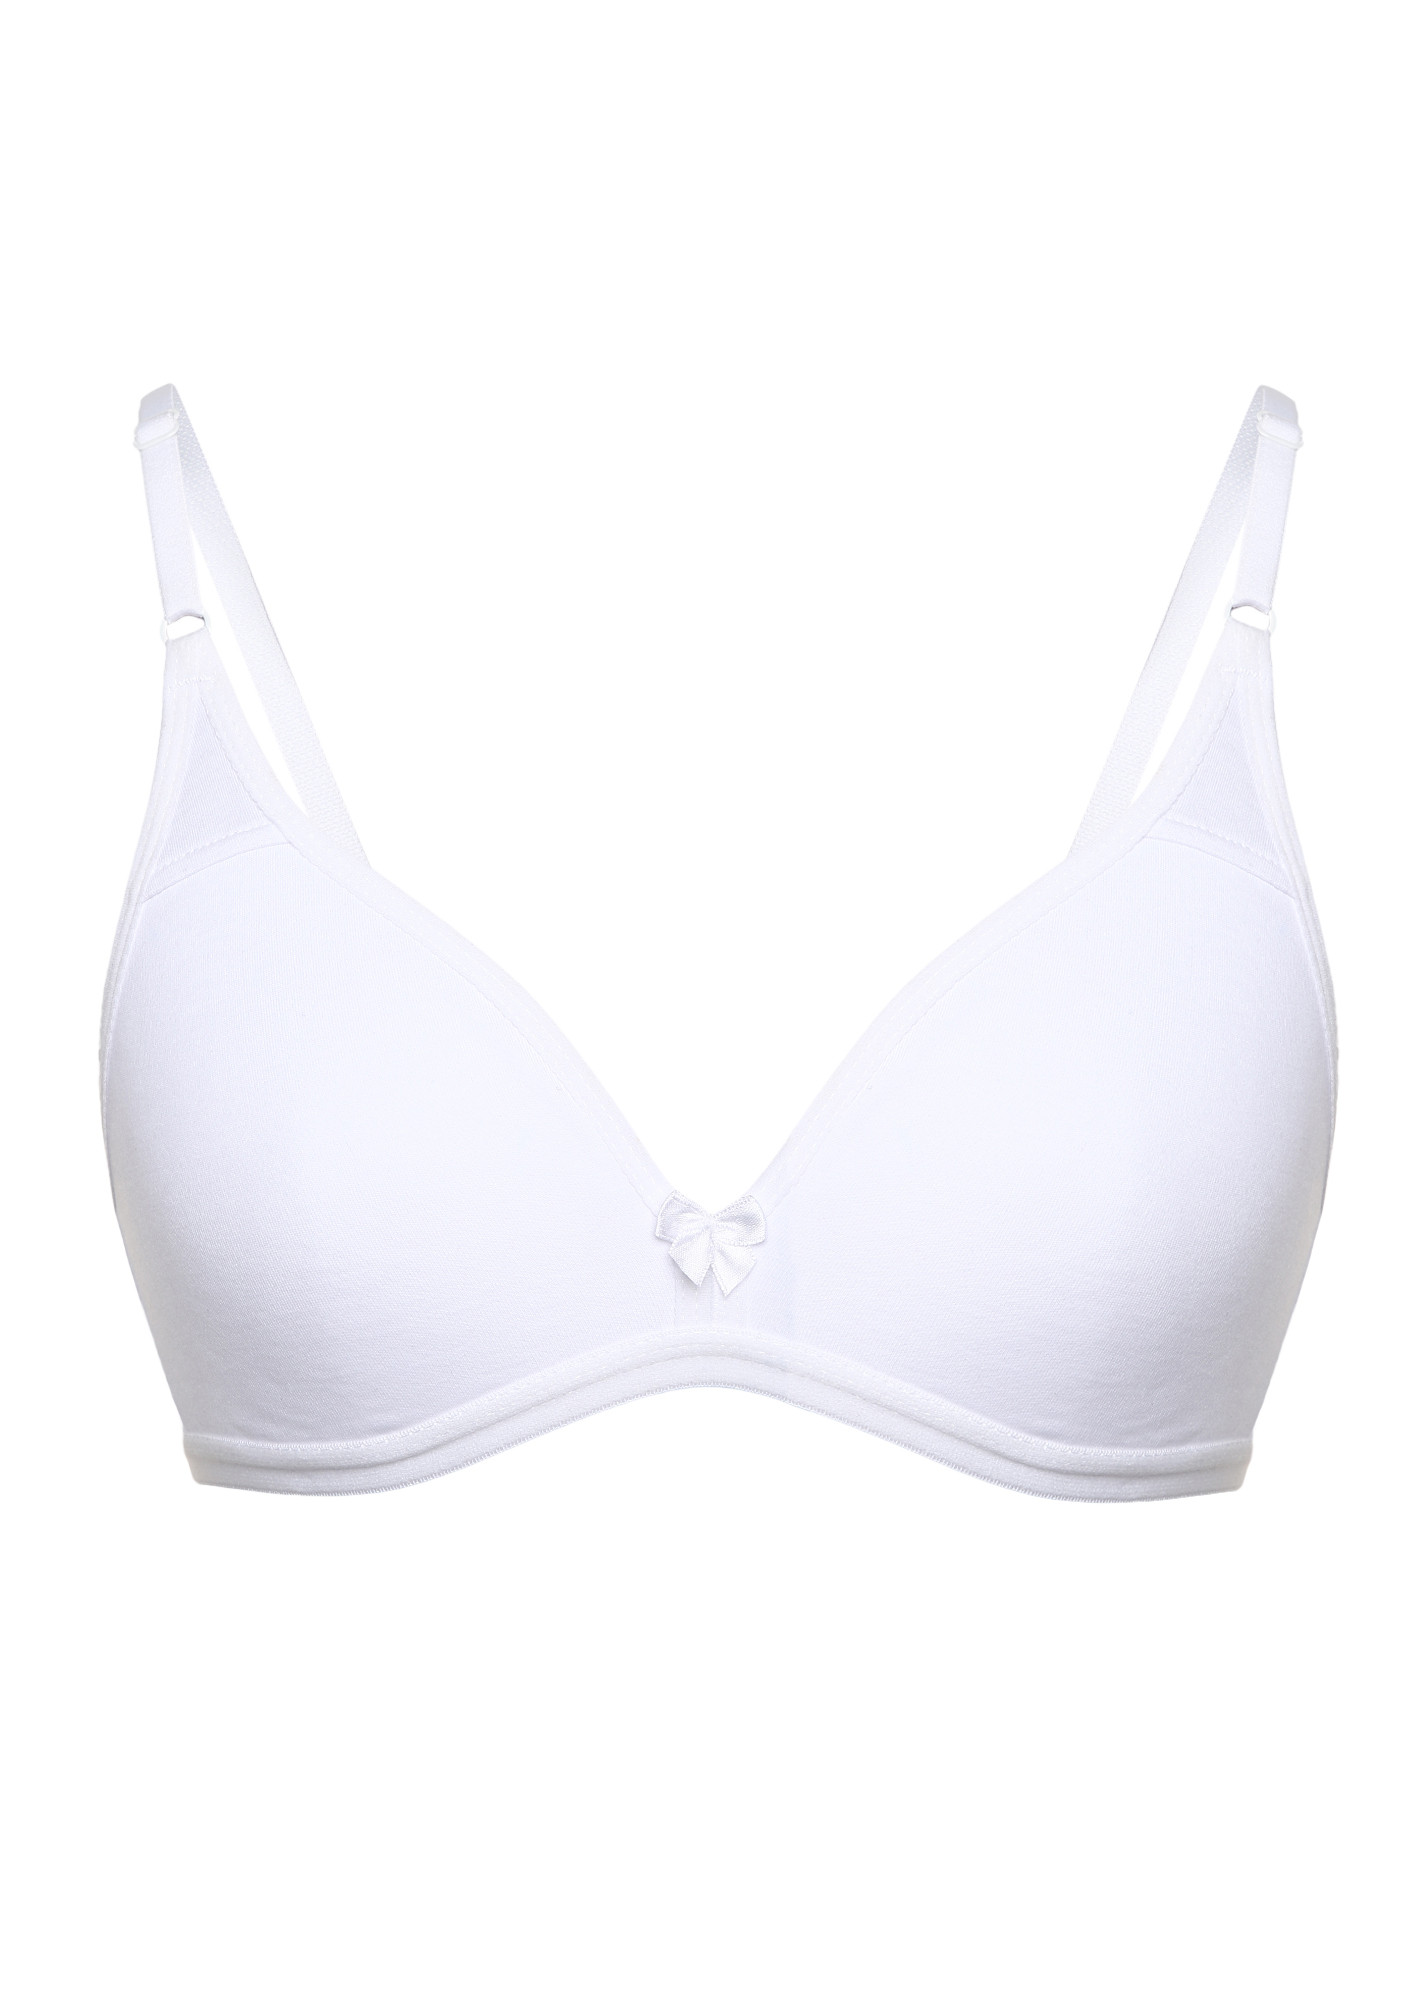 TELL ME MORE NON PADDED NON WIRED WHITE BRA